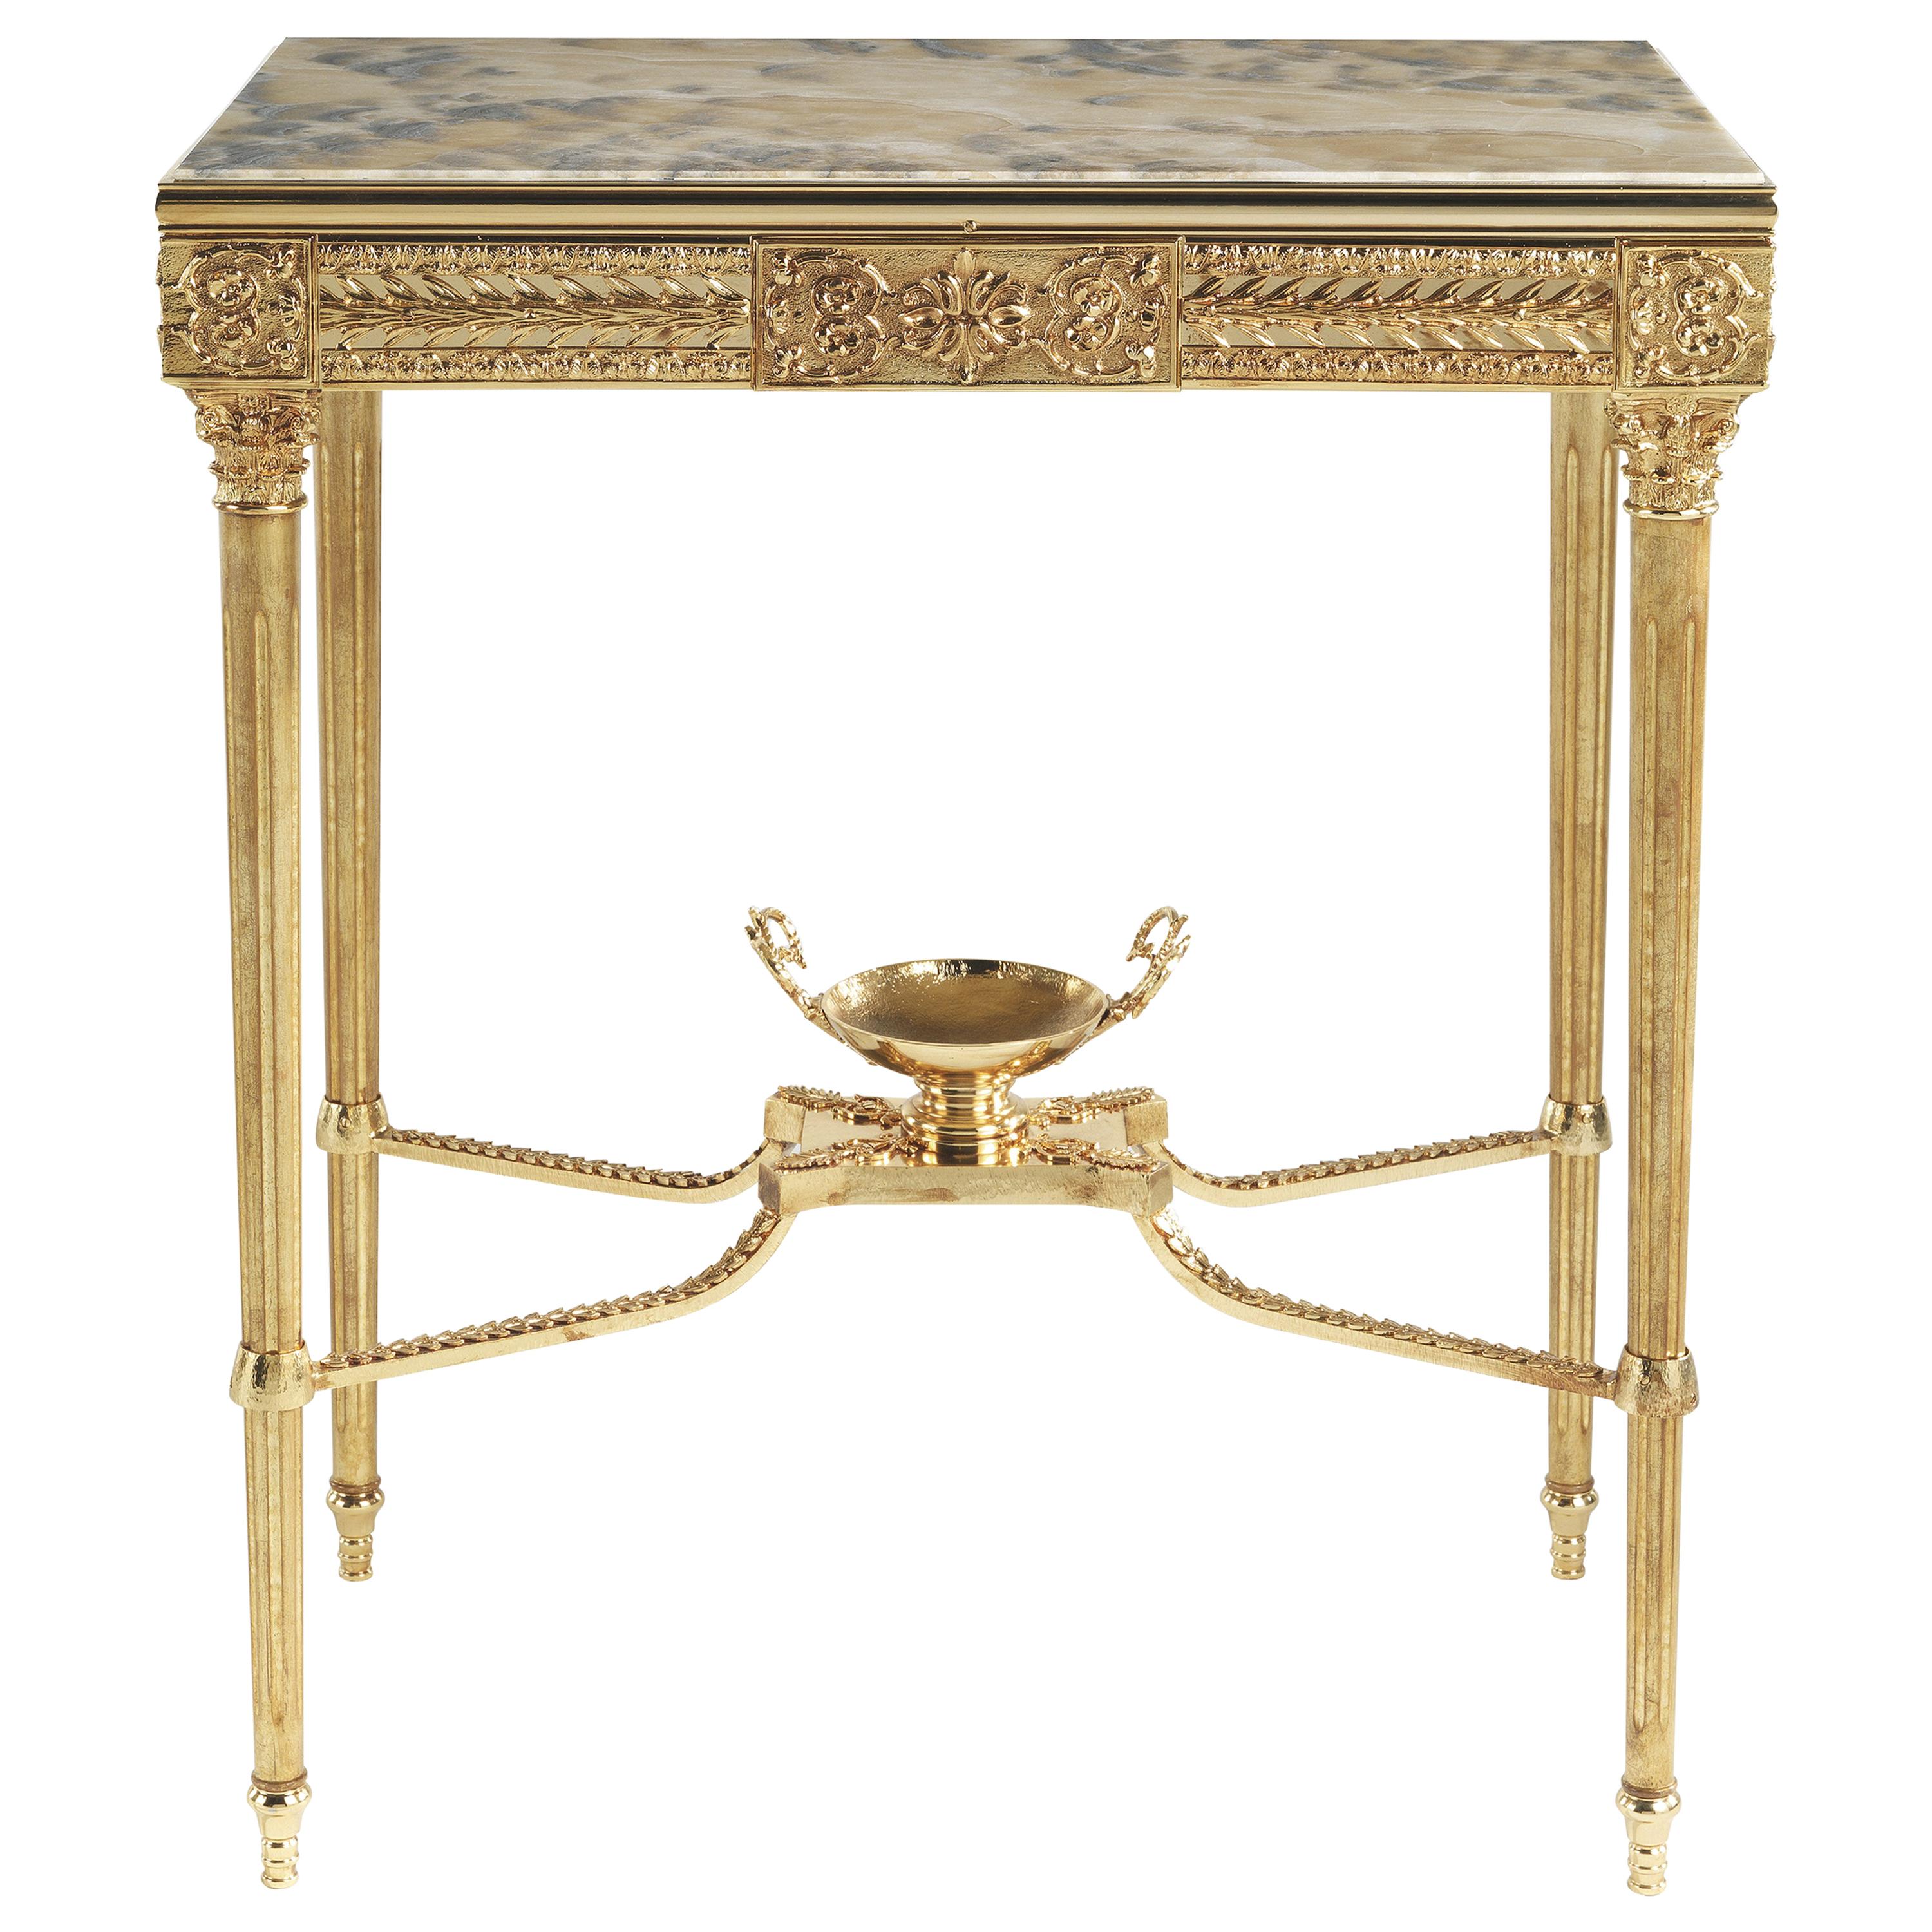 21st Century Shogun Side Table in Lost-wax Cast Brass and Cloudy Onyx Top For Sale